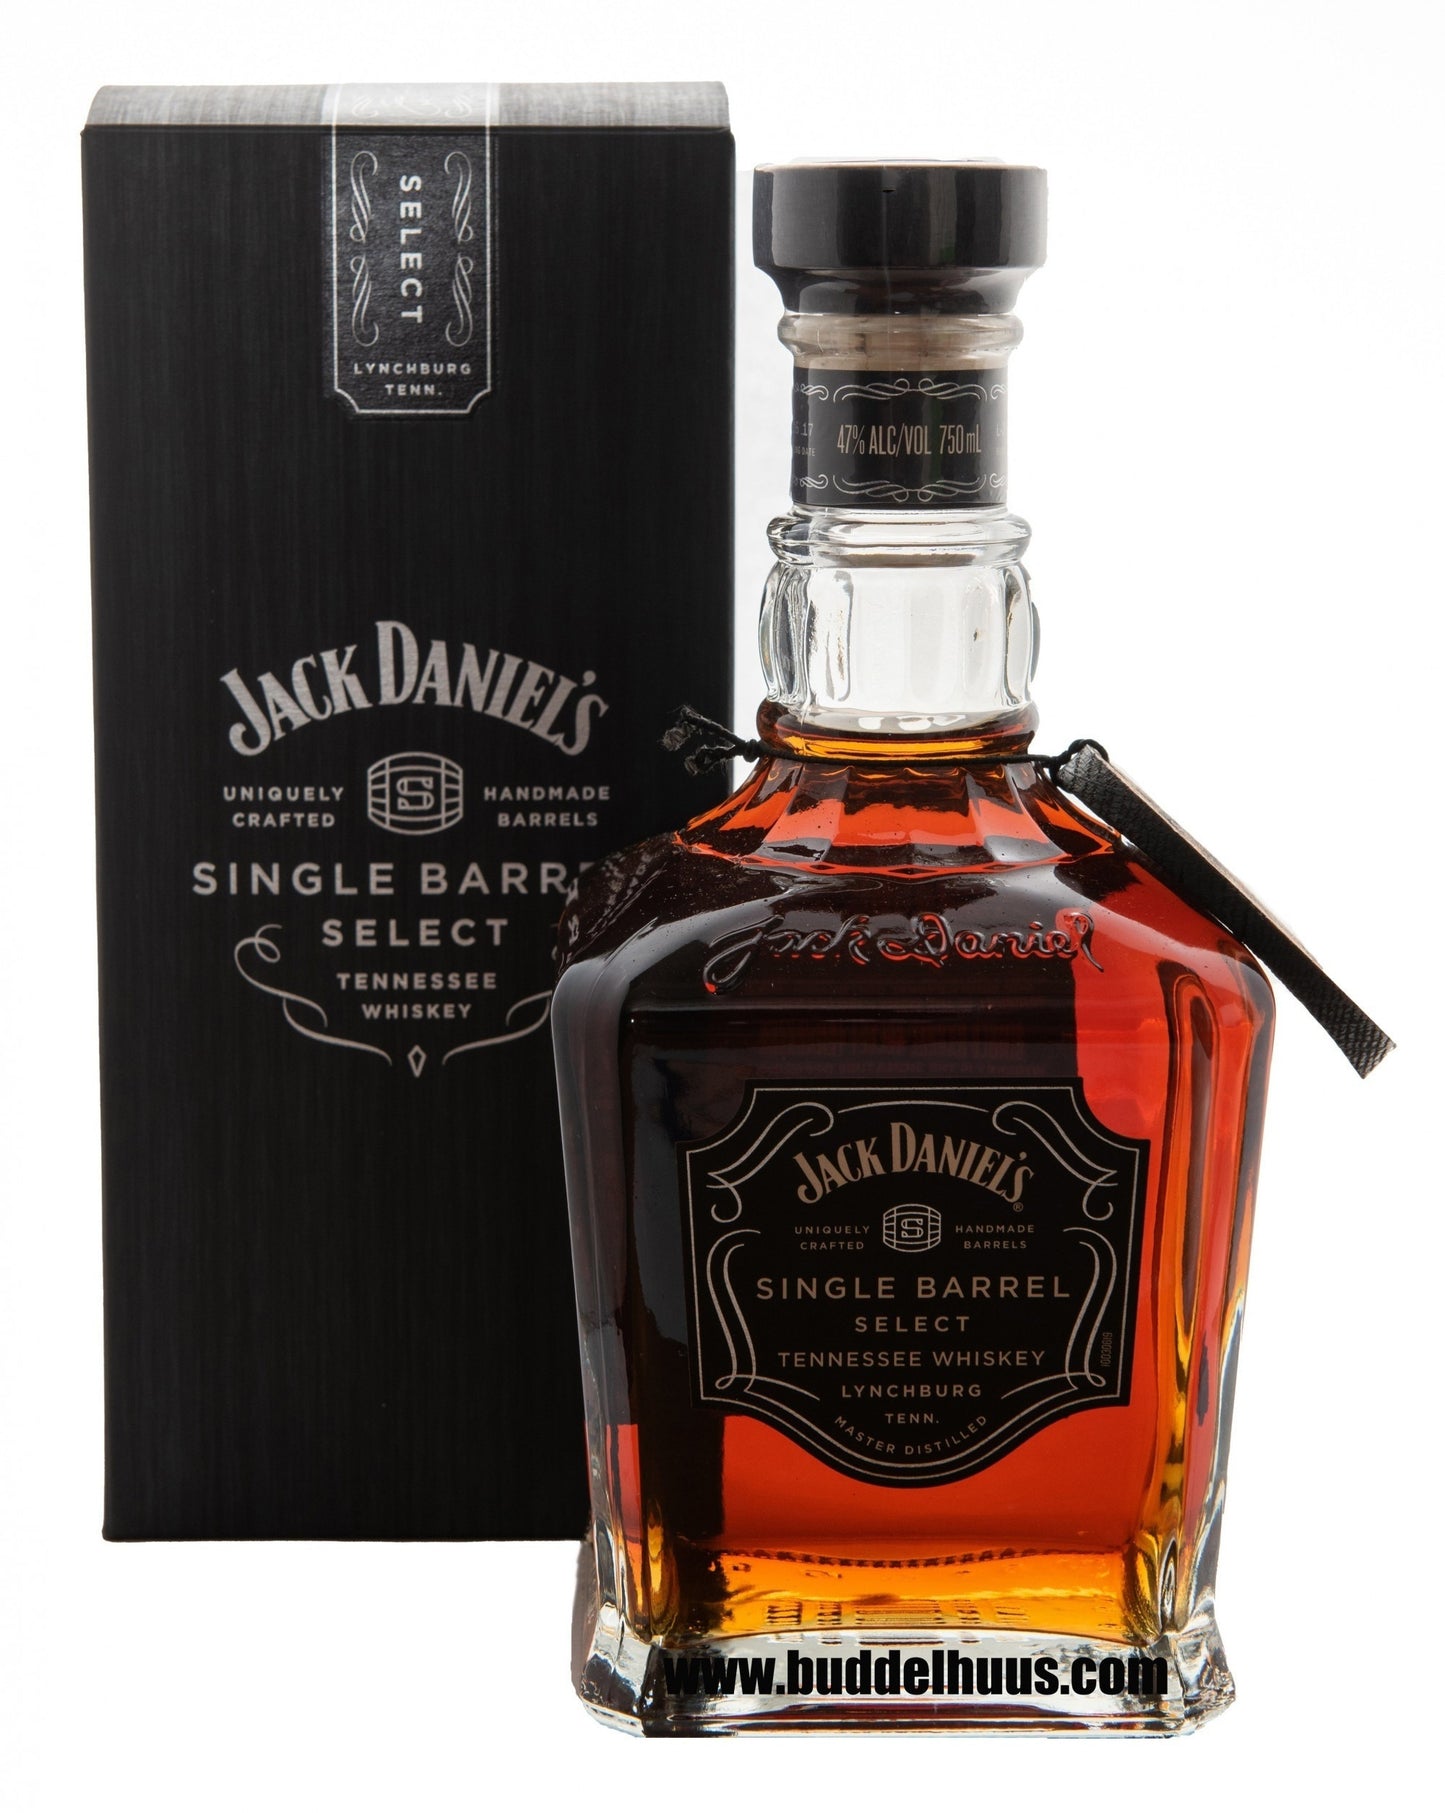 Jack Daniel's Single Barrel Select 2017 / Fueled by Fire, Driven by Courage